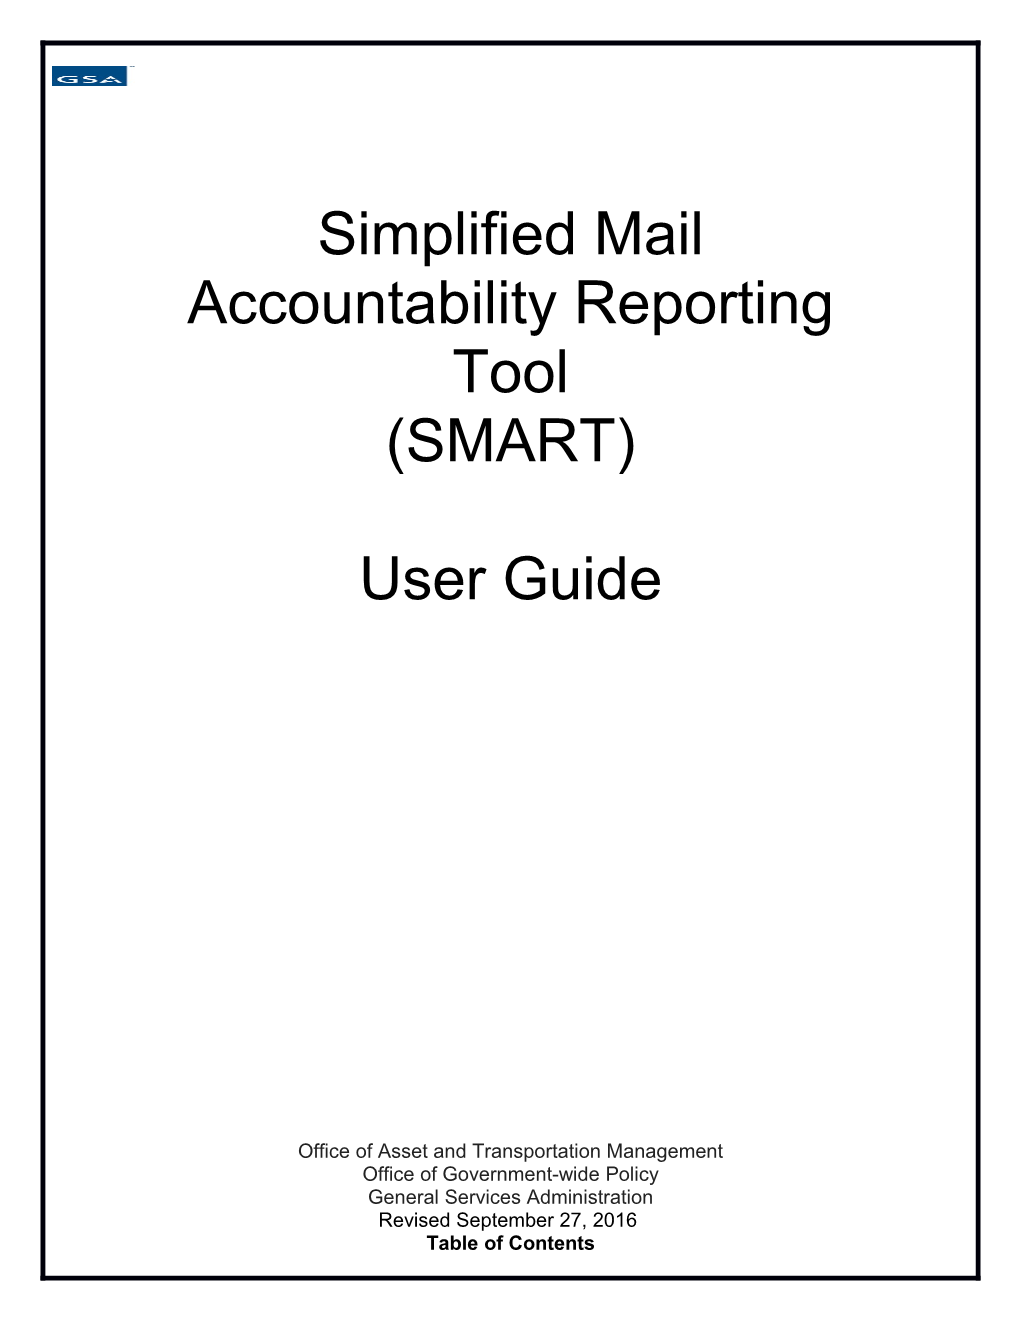 Simplified Mail Accountability Reporting Tool (SMART) User Guide